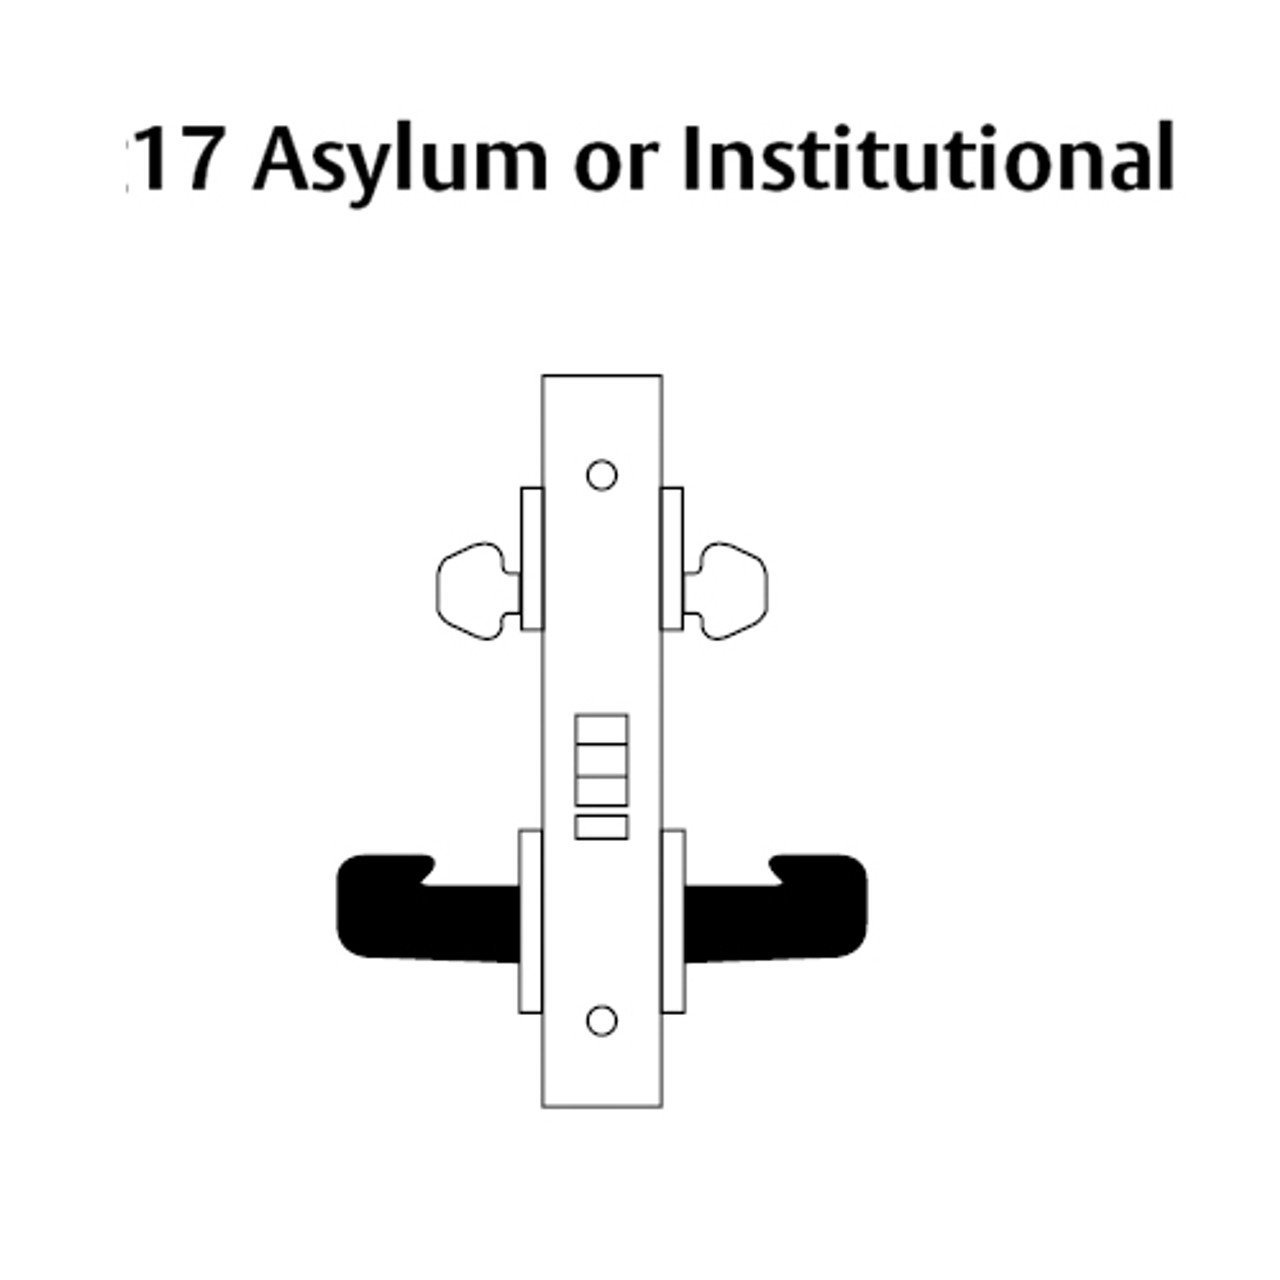 8217-LNW-10 Sargent 8200 Series Asylum or Institutional Mortise Lock with LNW Lever Trim in Dull Bronze